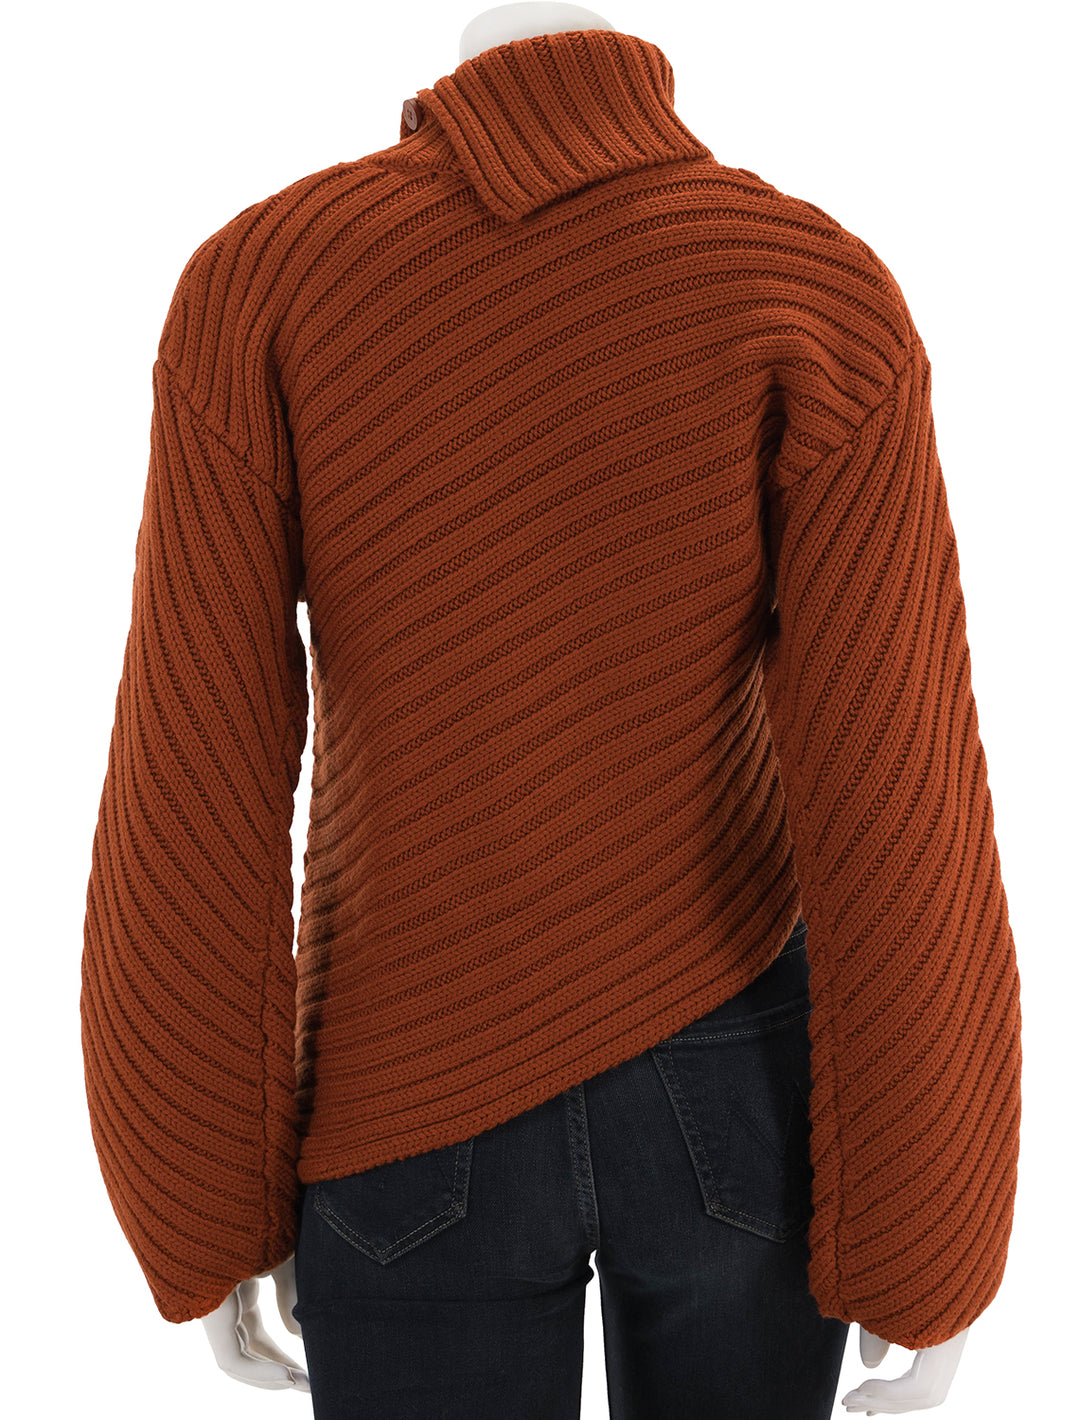 Back view of STAUD's engrave sweater in cinnamon.